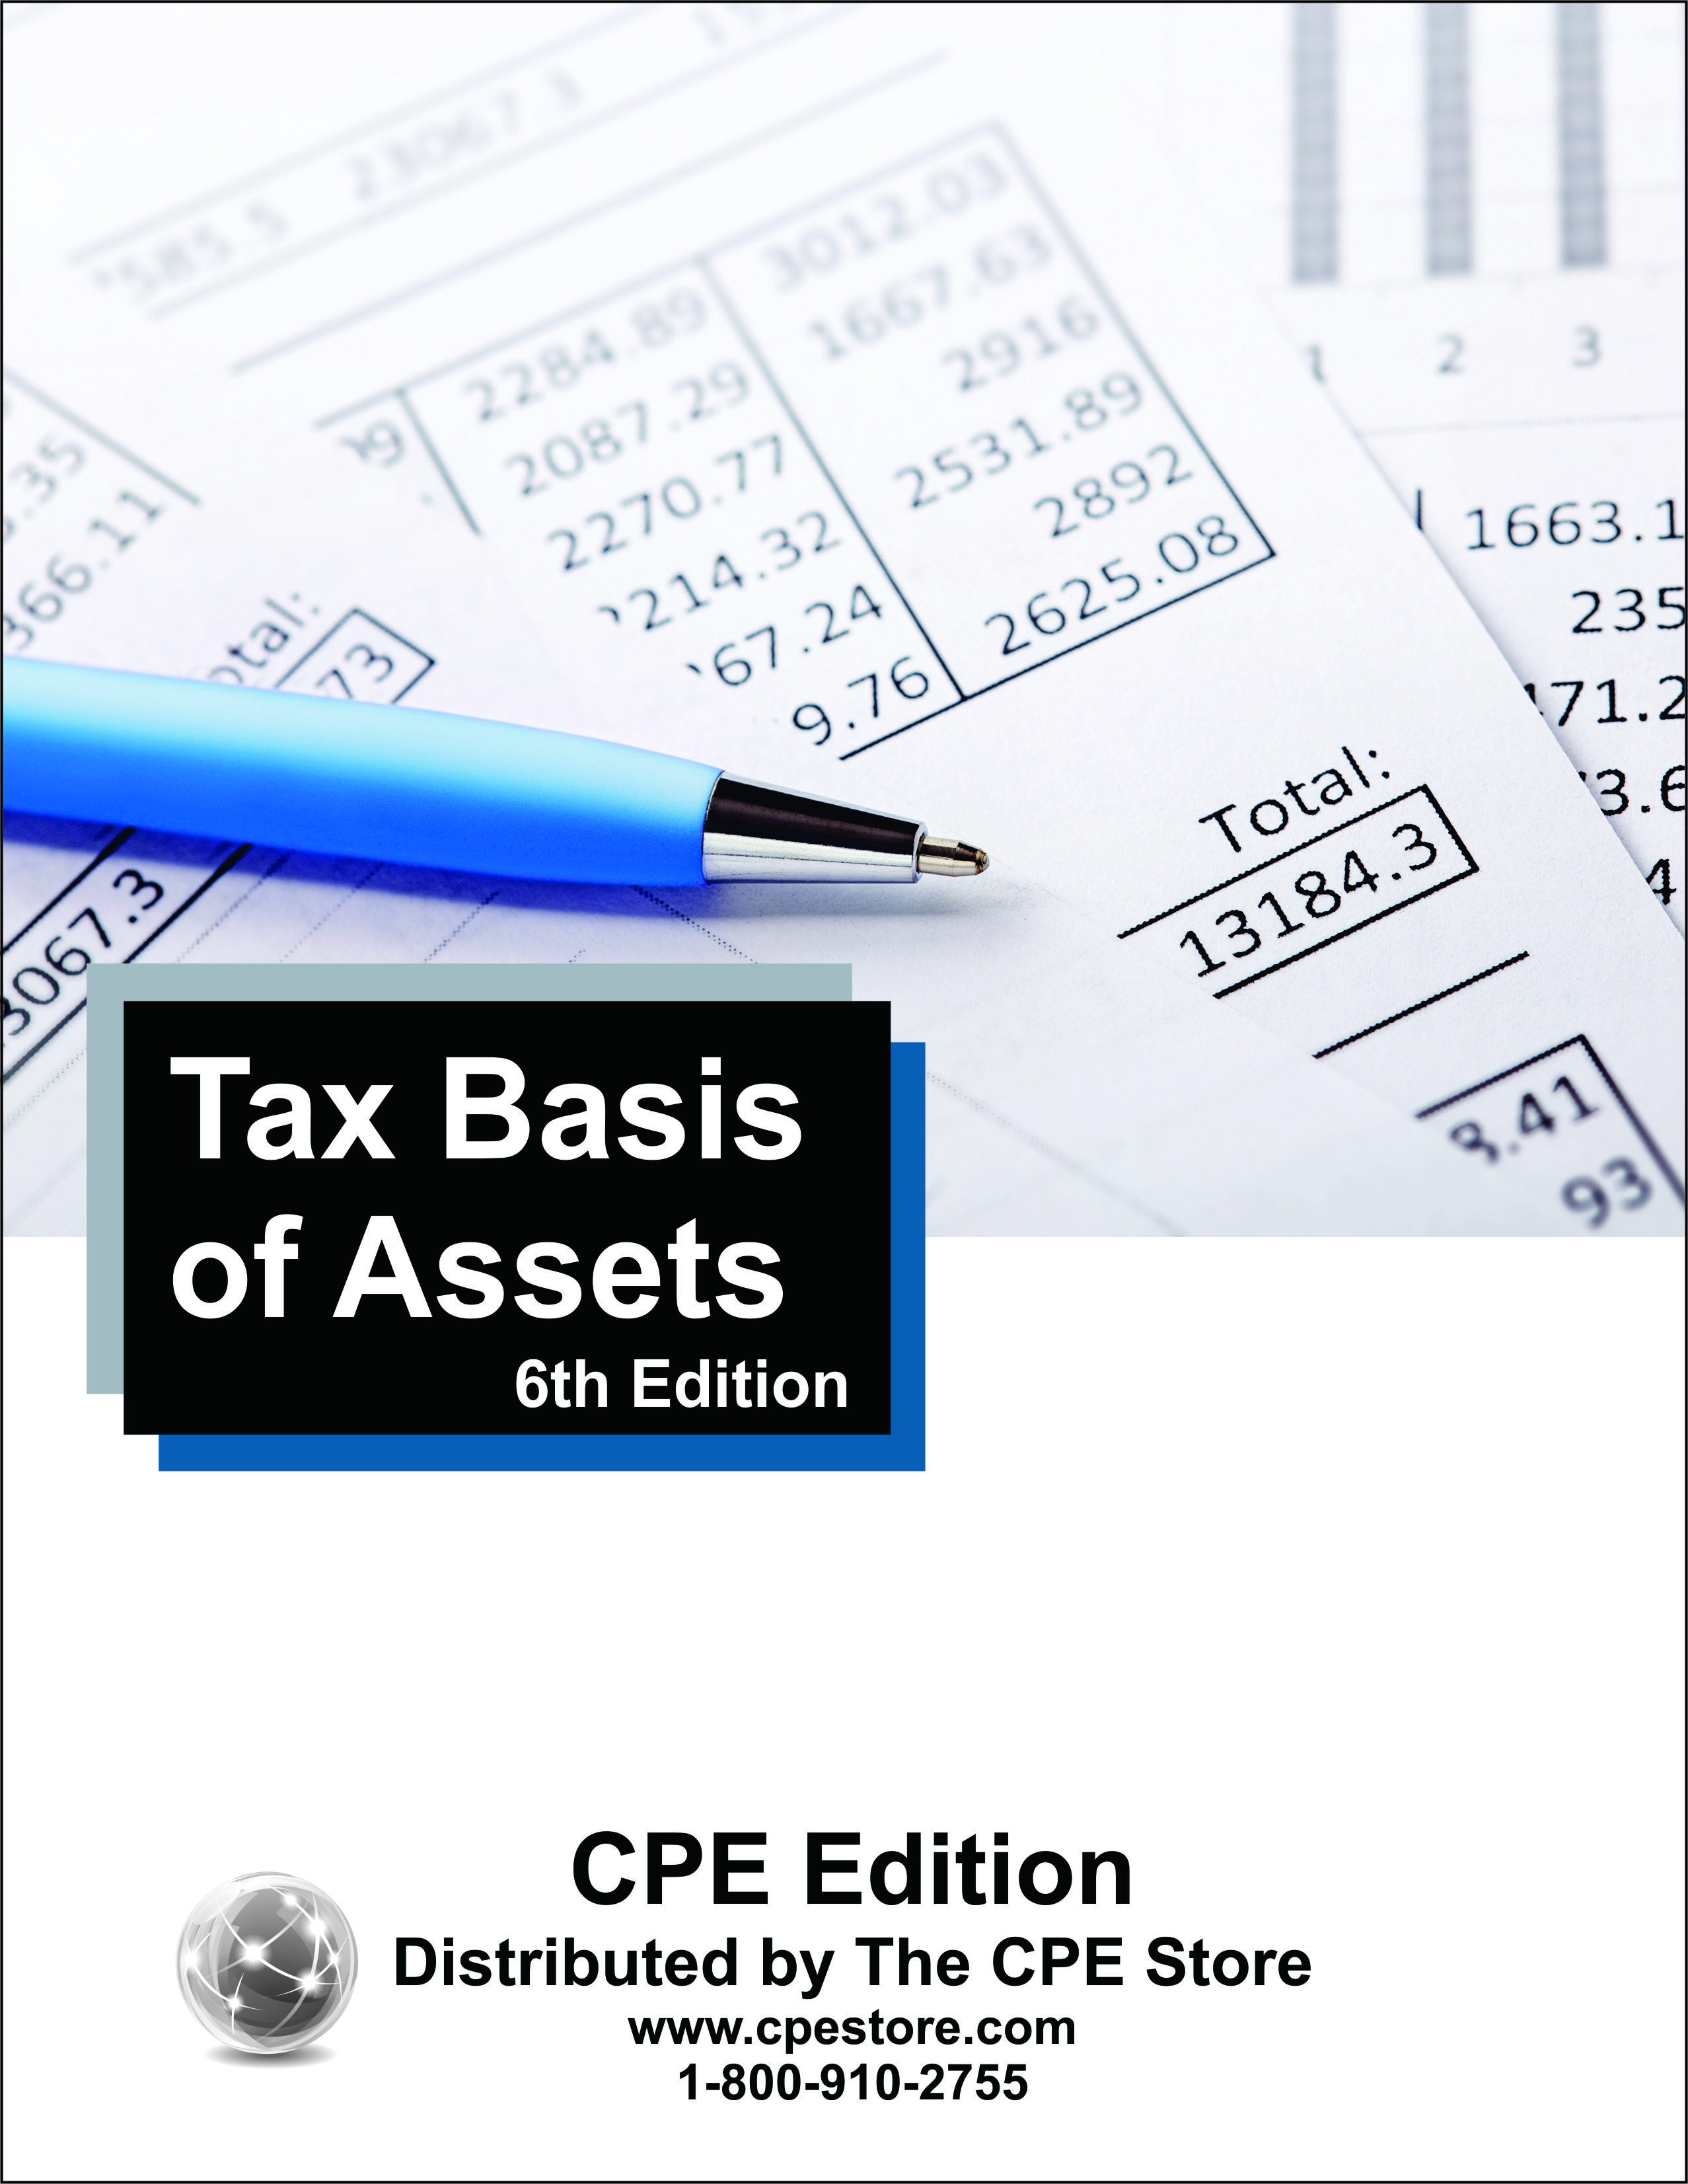 Tax Basis of Assets